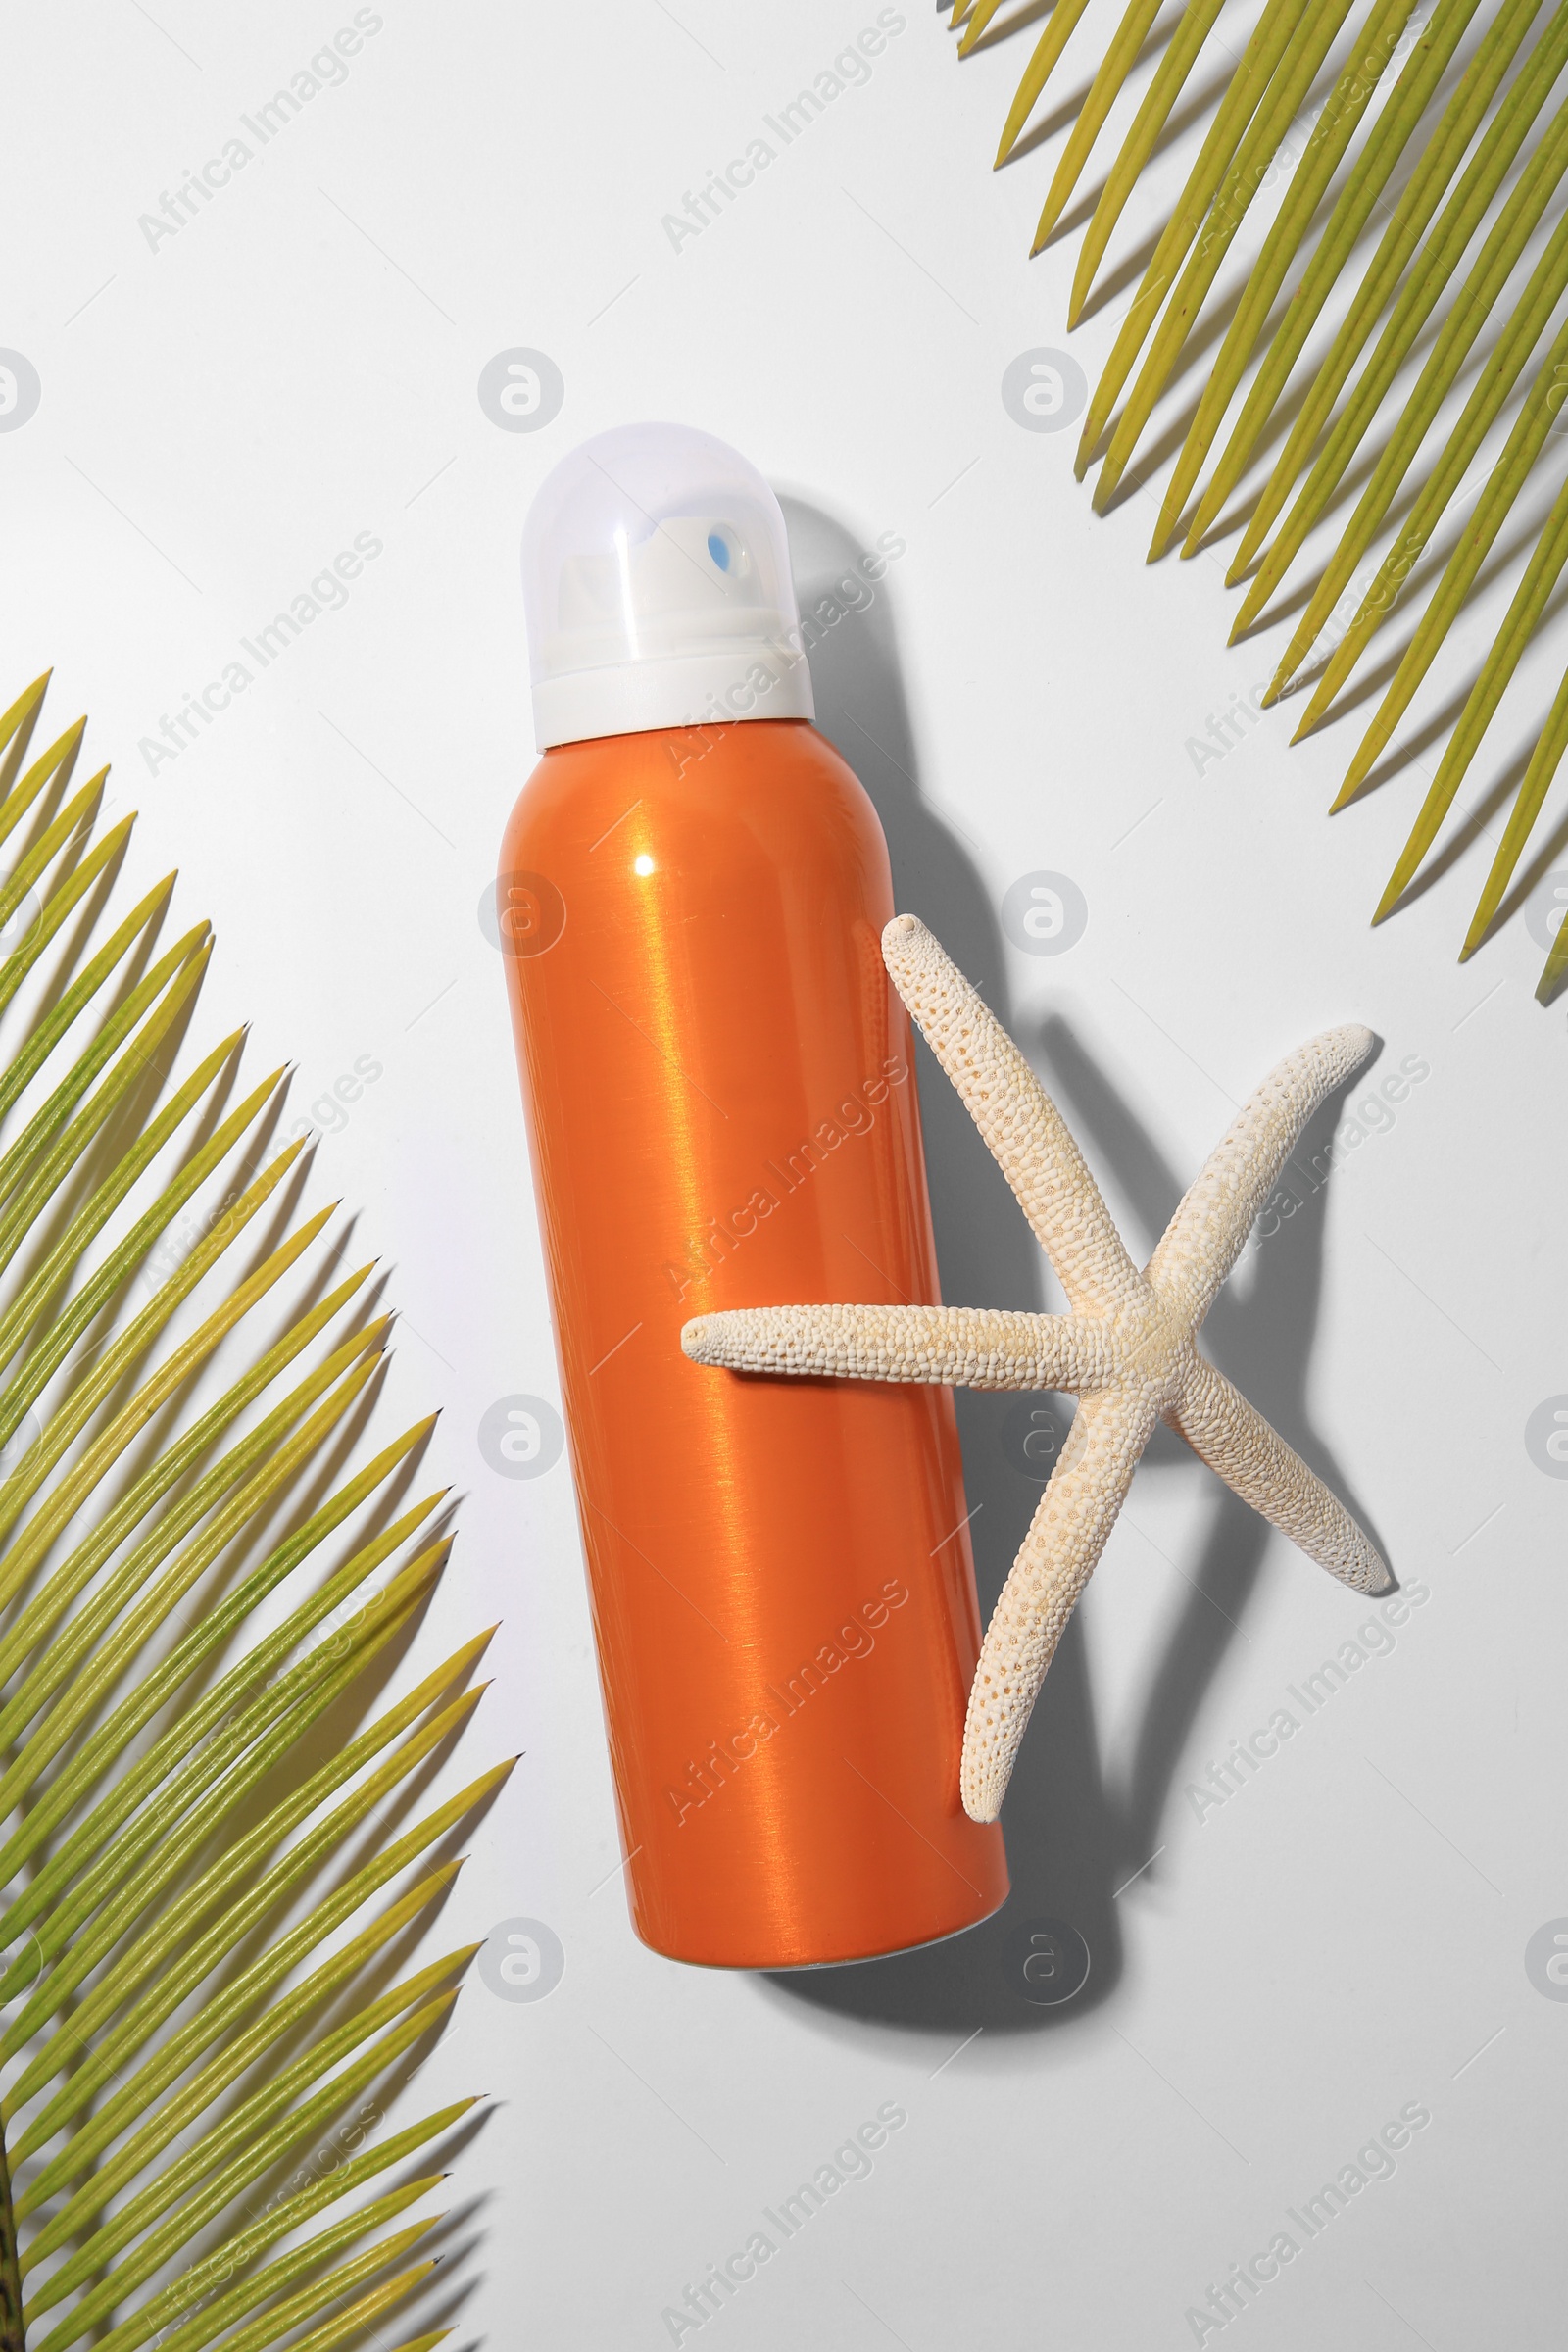 Photo of Sunscreen, starfish and tropical leaves on white background, flat lay. Sun protection care